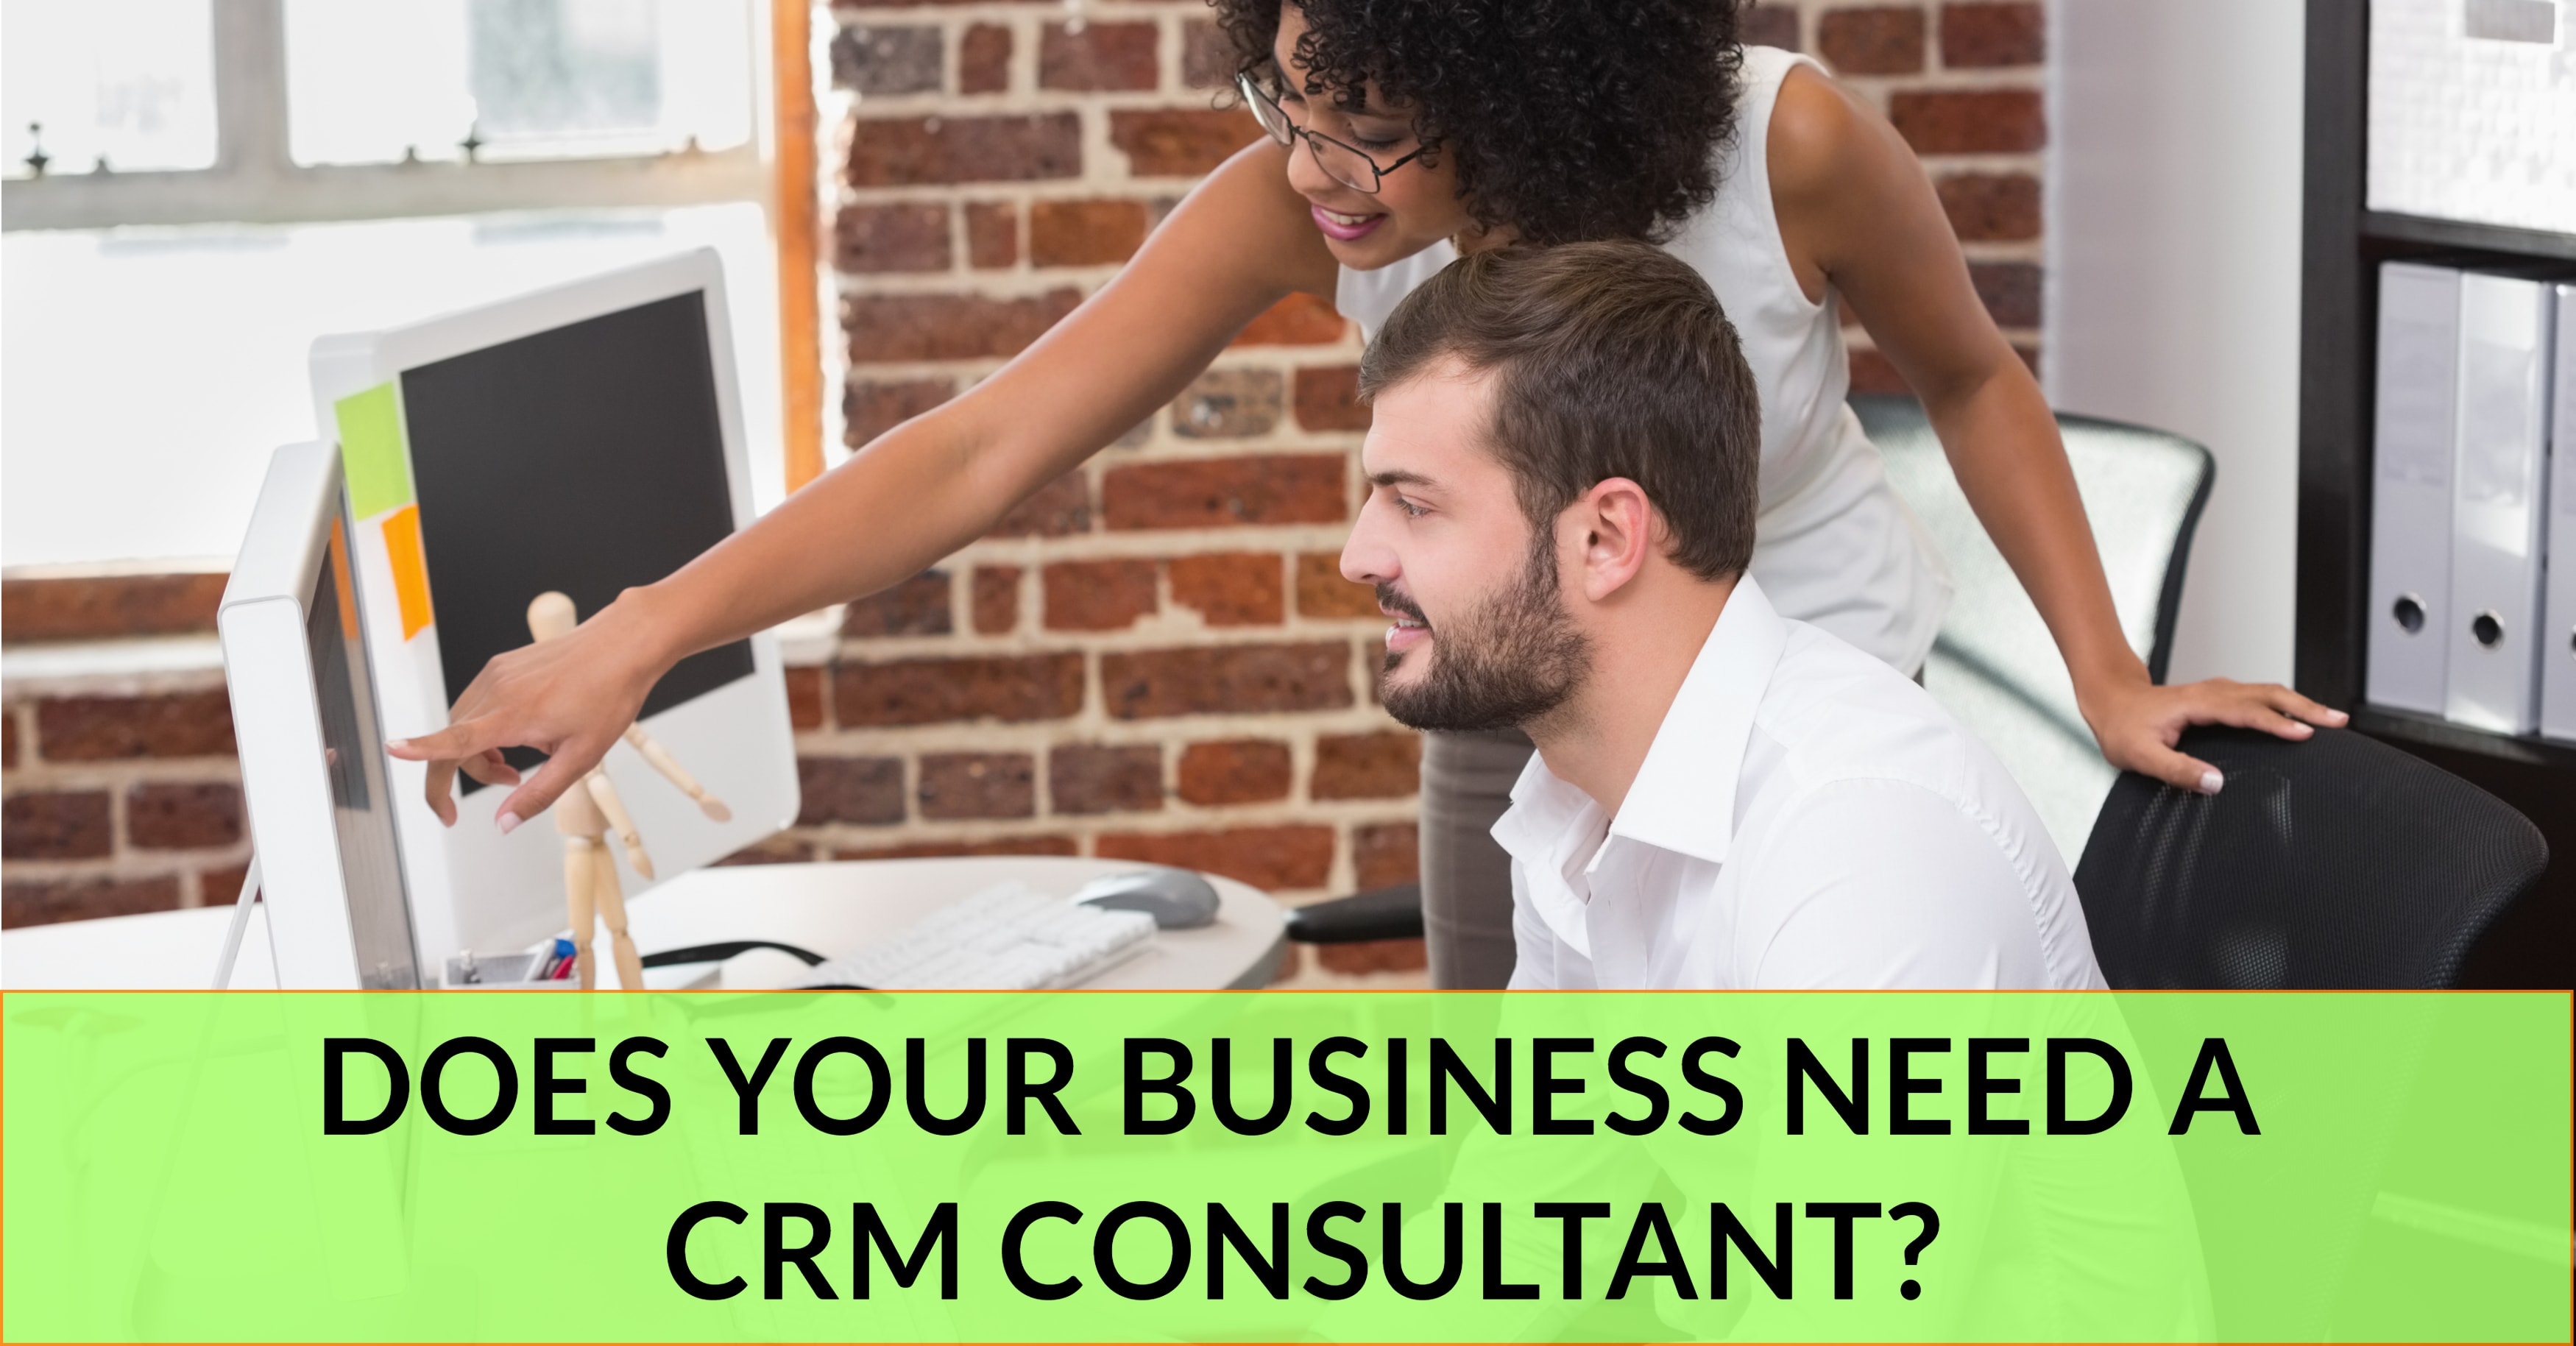 Does Your Business Need a CRM Consultant?